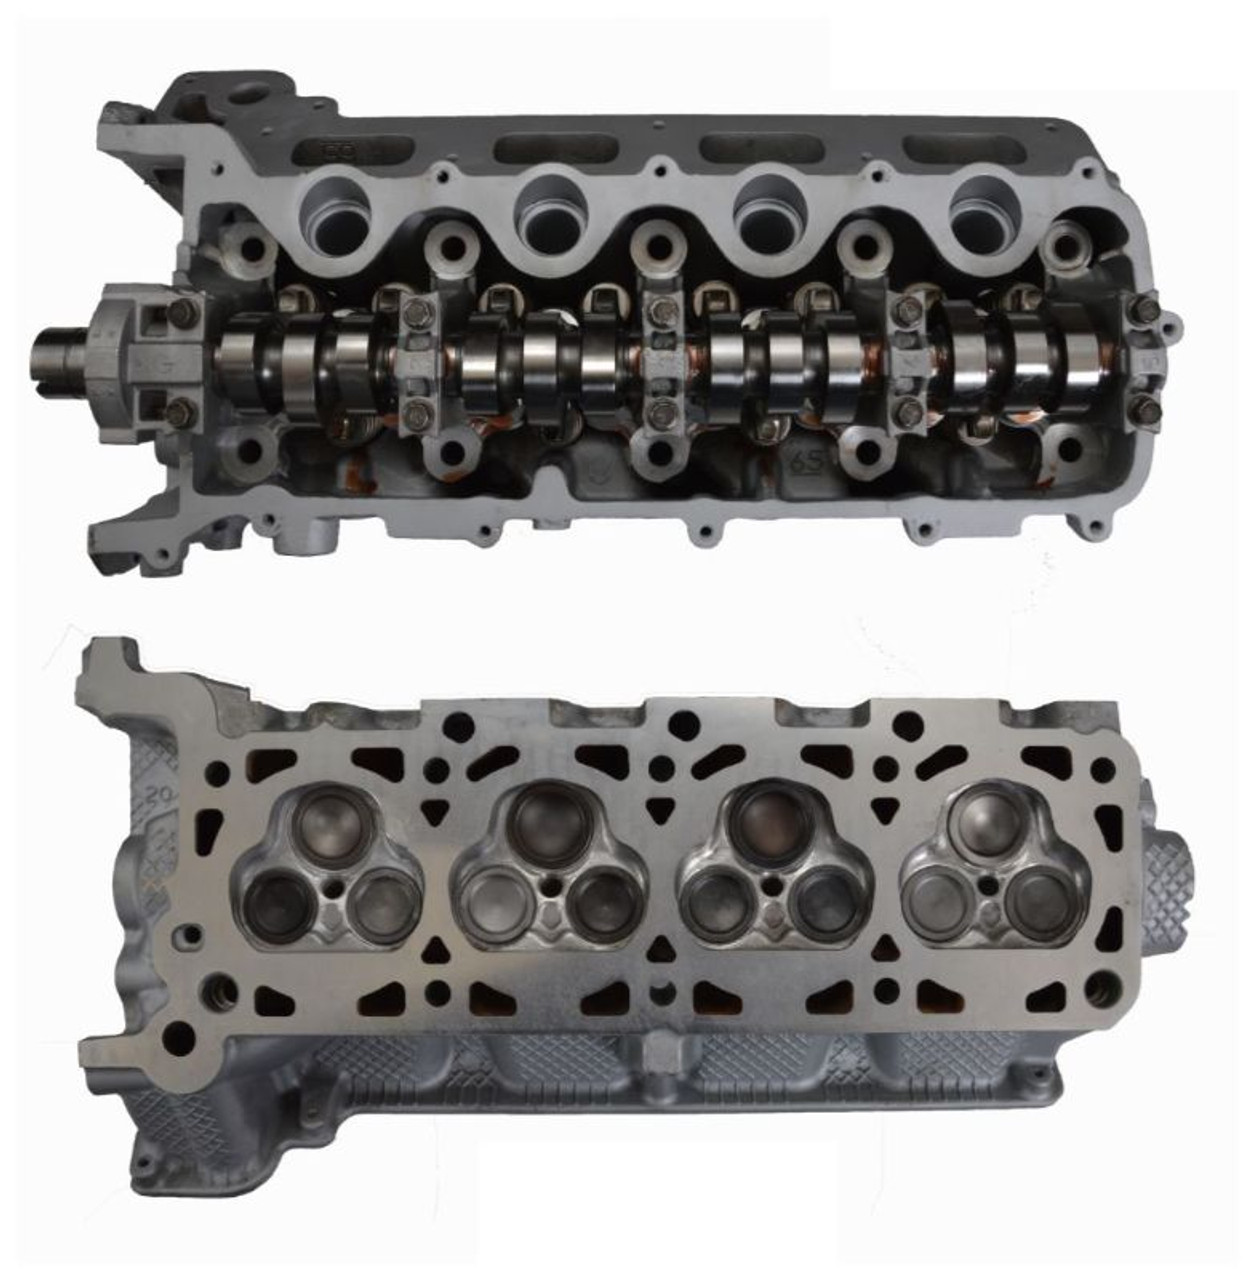 2007 Ford Expedition 5.4L Engine Cylinder Head Assembly CH1039R -13